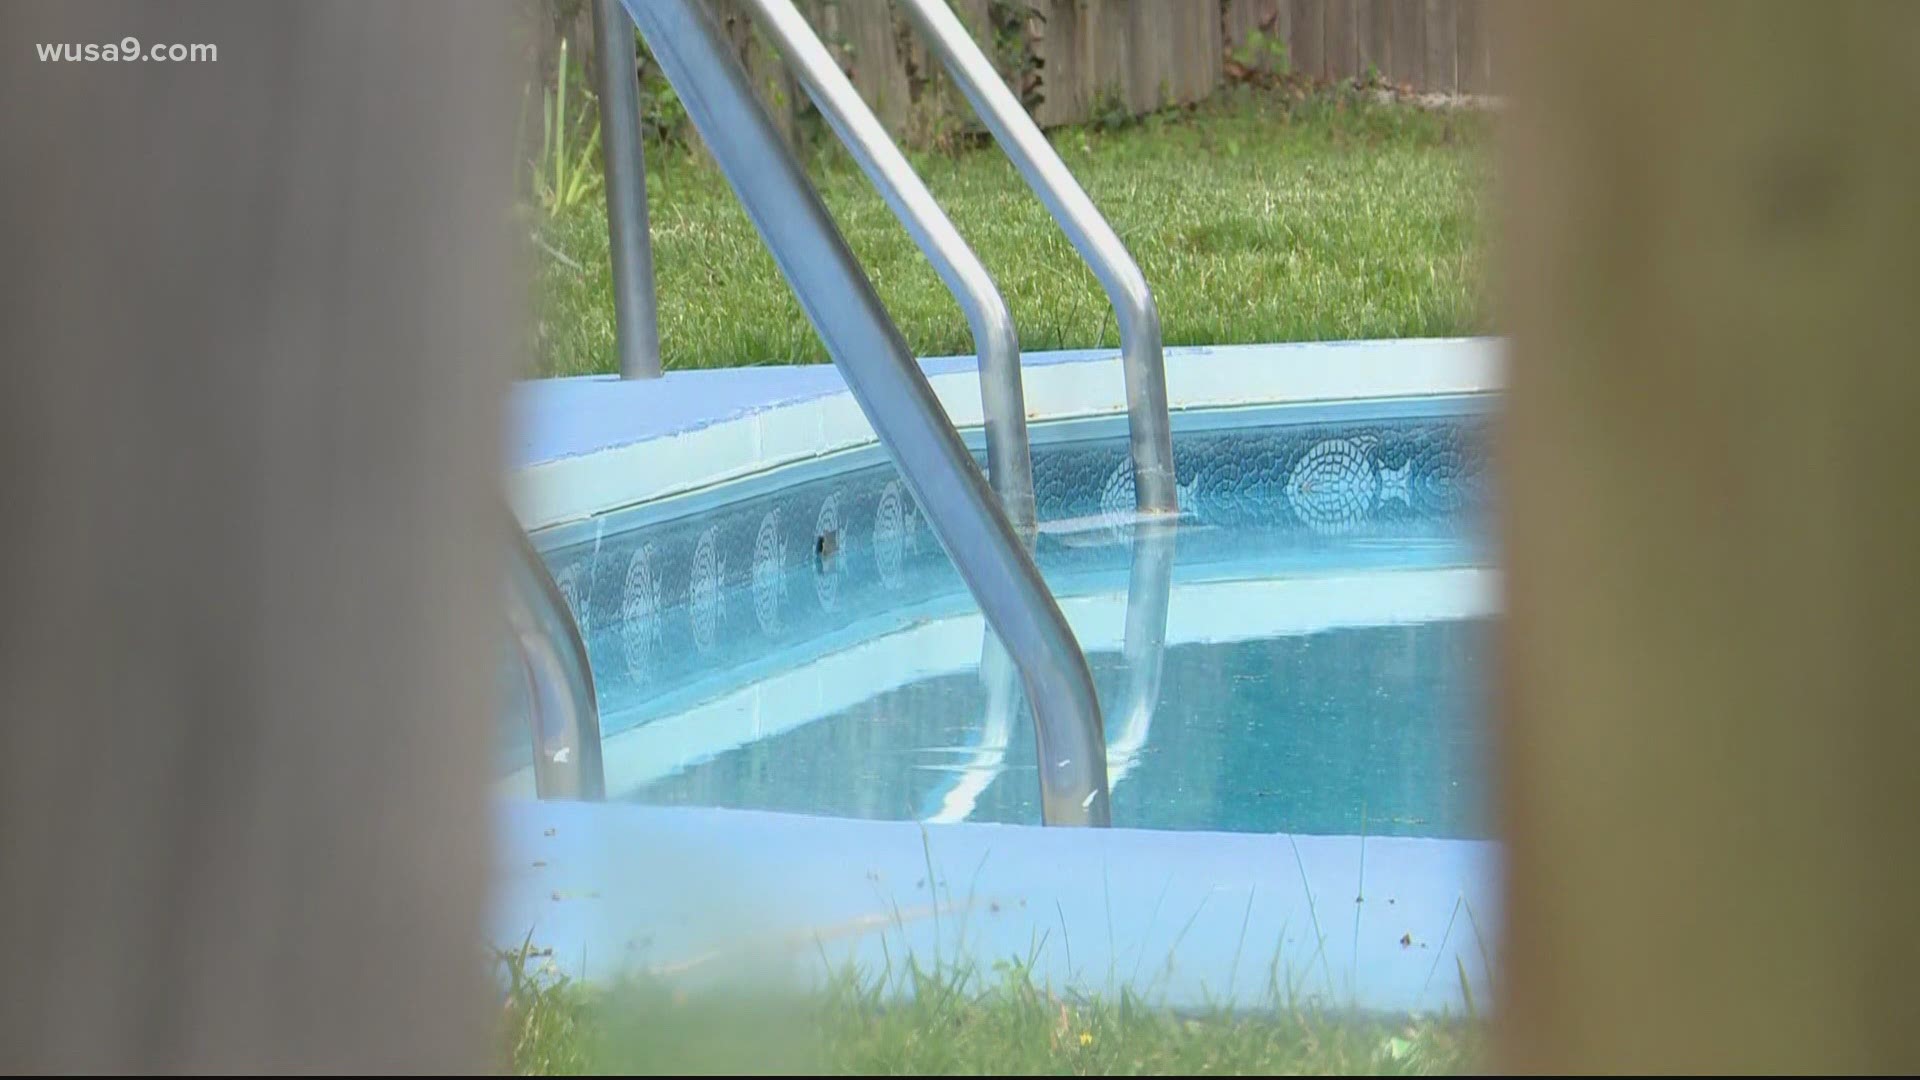 Law enforcement said the father jumped in the deep end of a pool to rescue his 7-year-old daughter even though he didn't know how to swim.